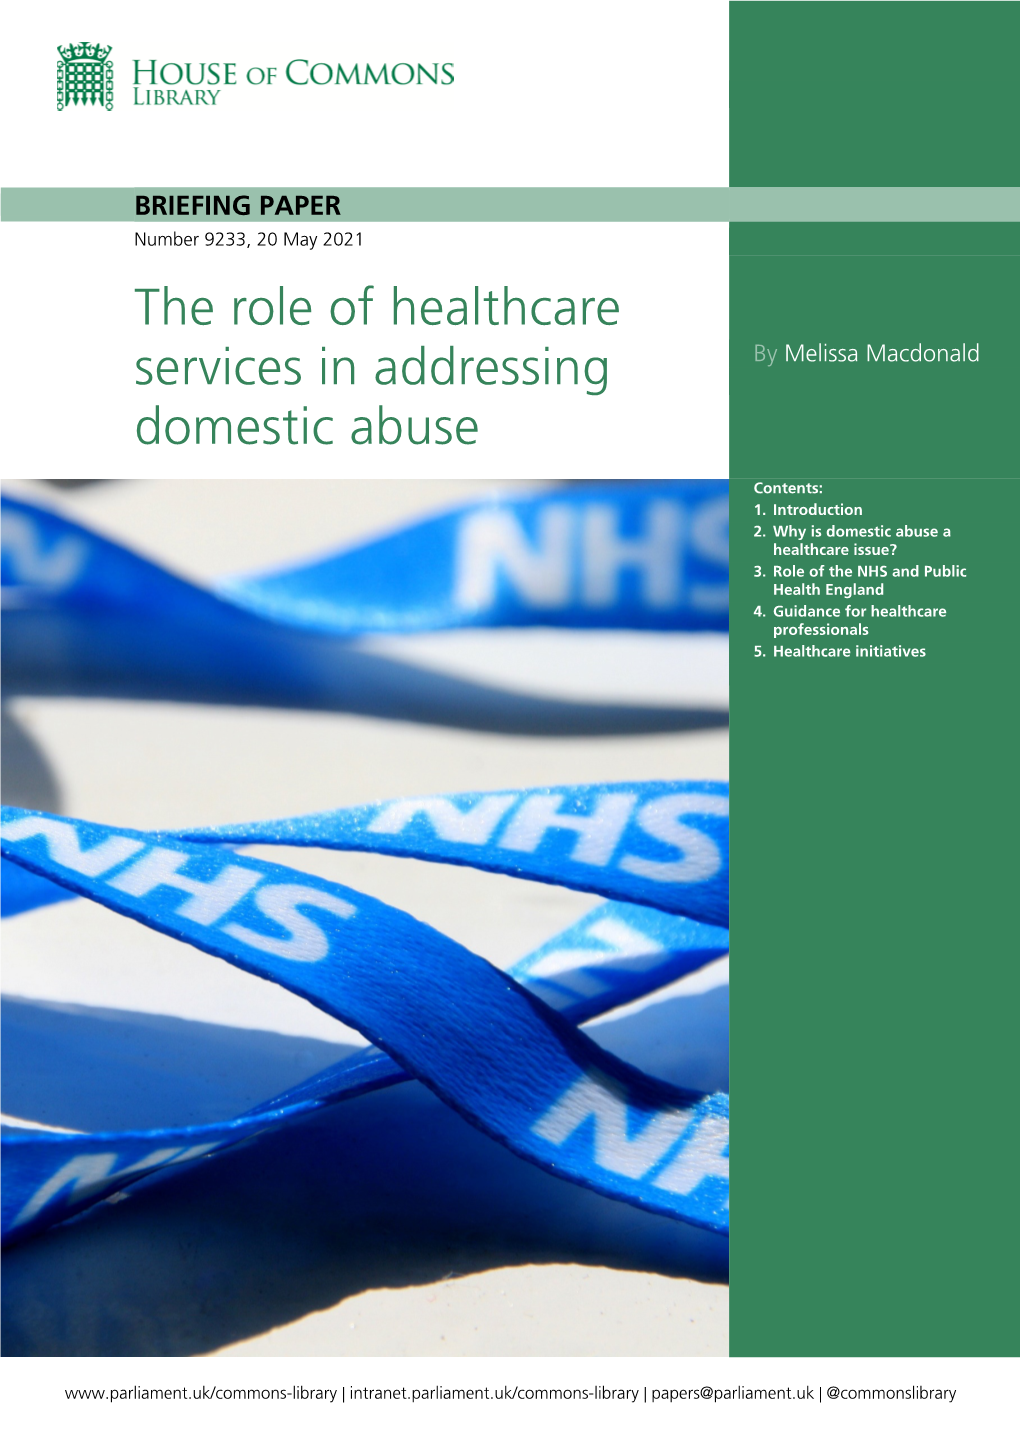 The Role of Healthcare Services in Addressing Domestic Abuse